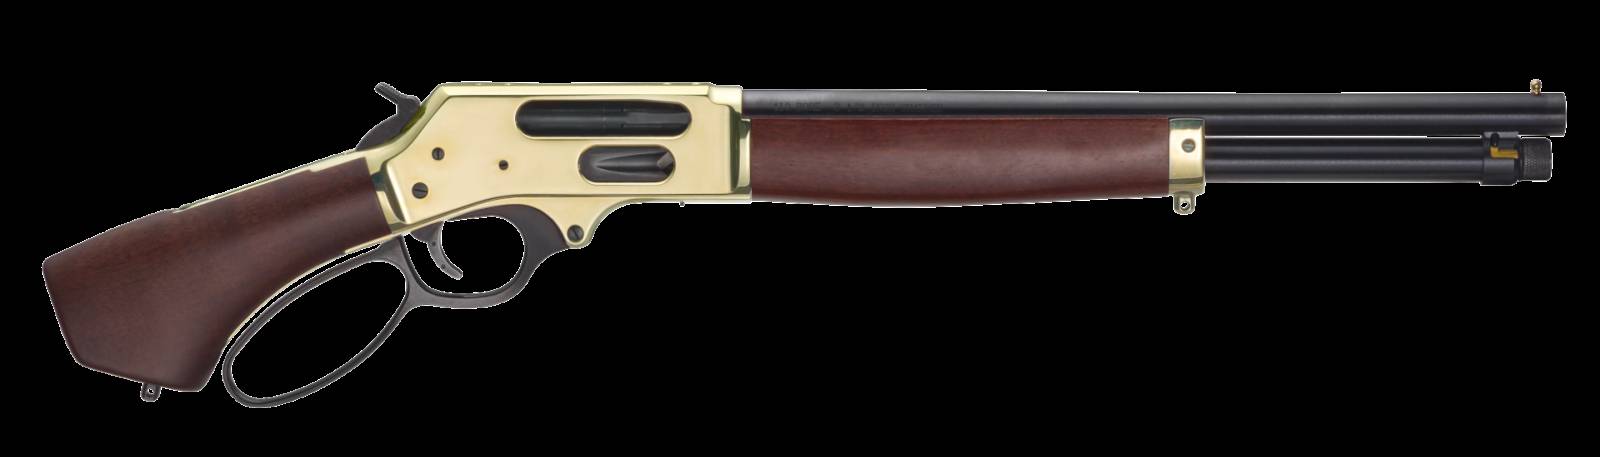 Henry H018BAH410 Axe 410 Bore 5+1 15.14" Blued Barrel, Fixed American-img-0